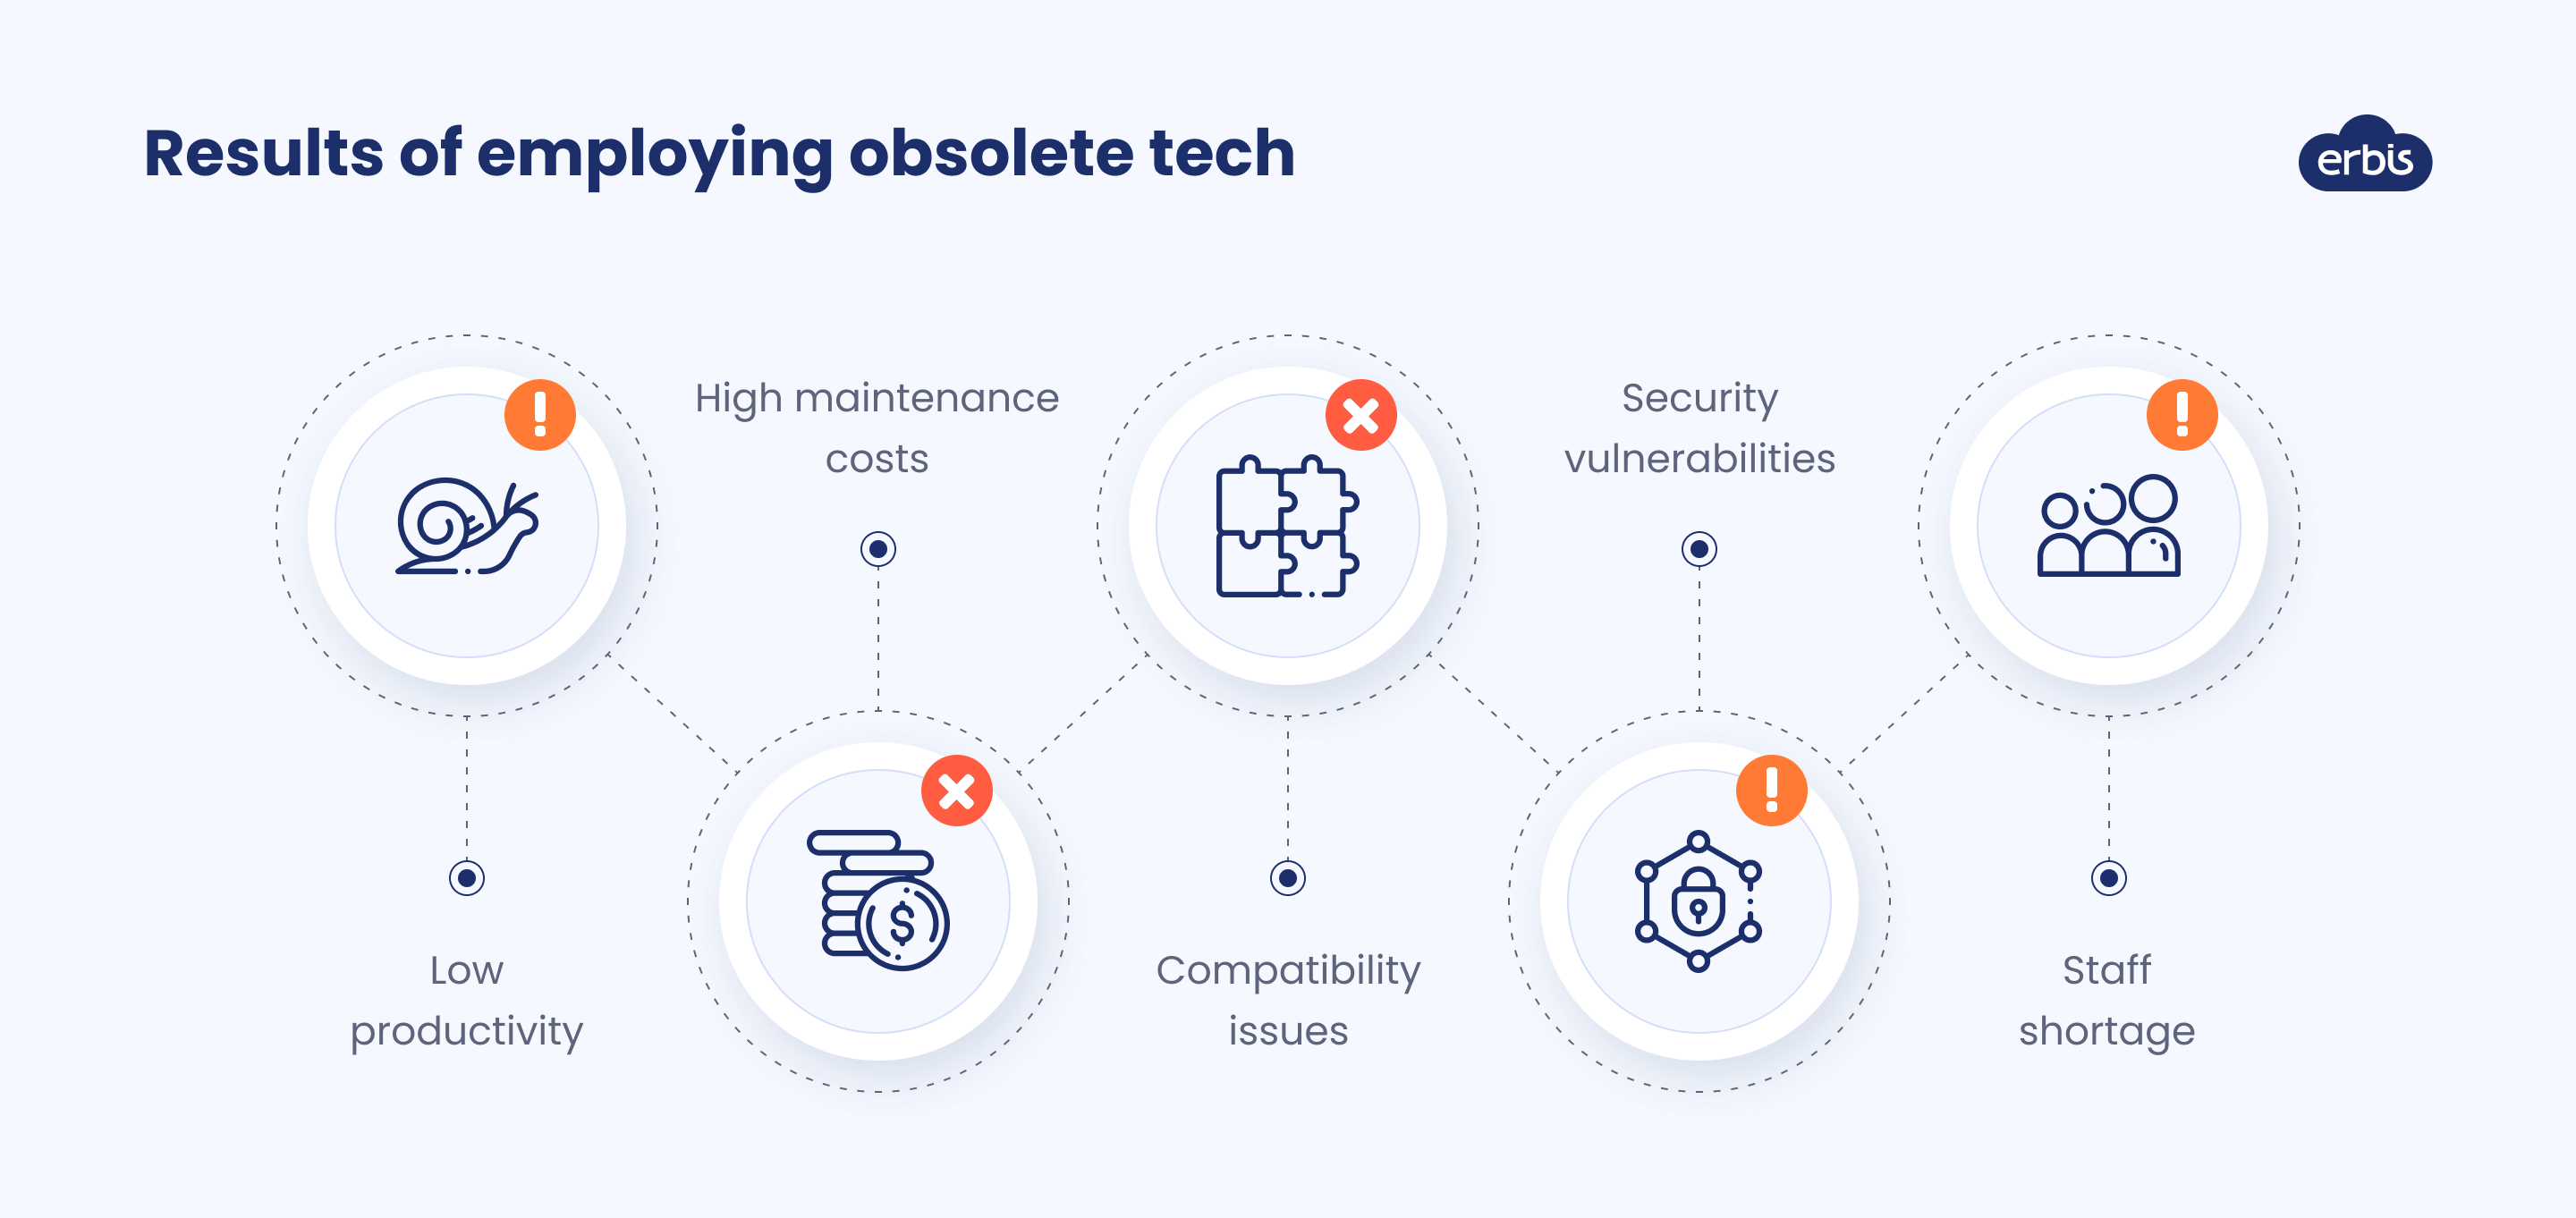 How obsolete tech affects business